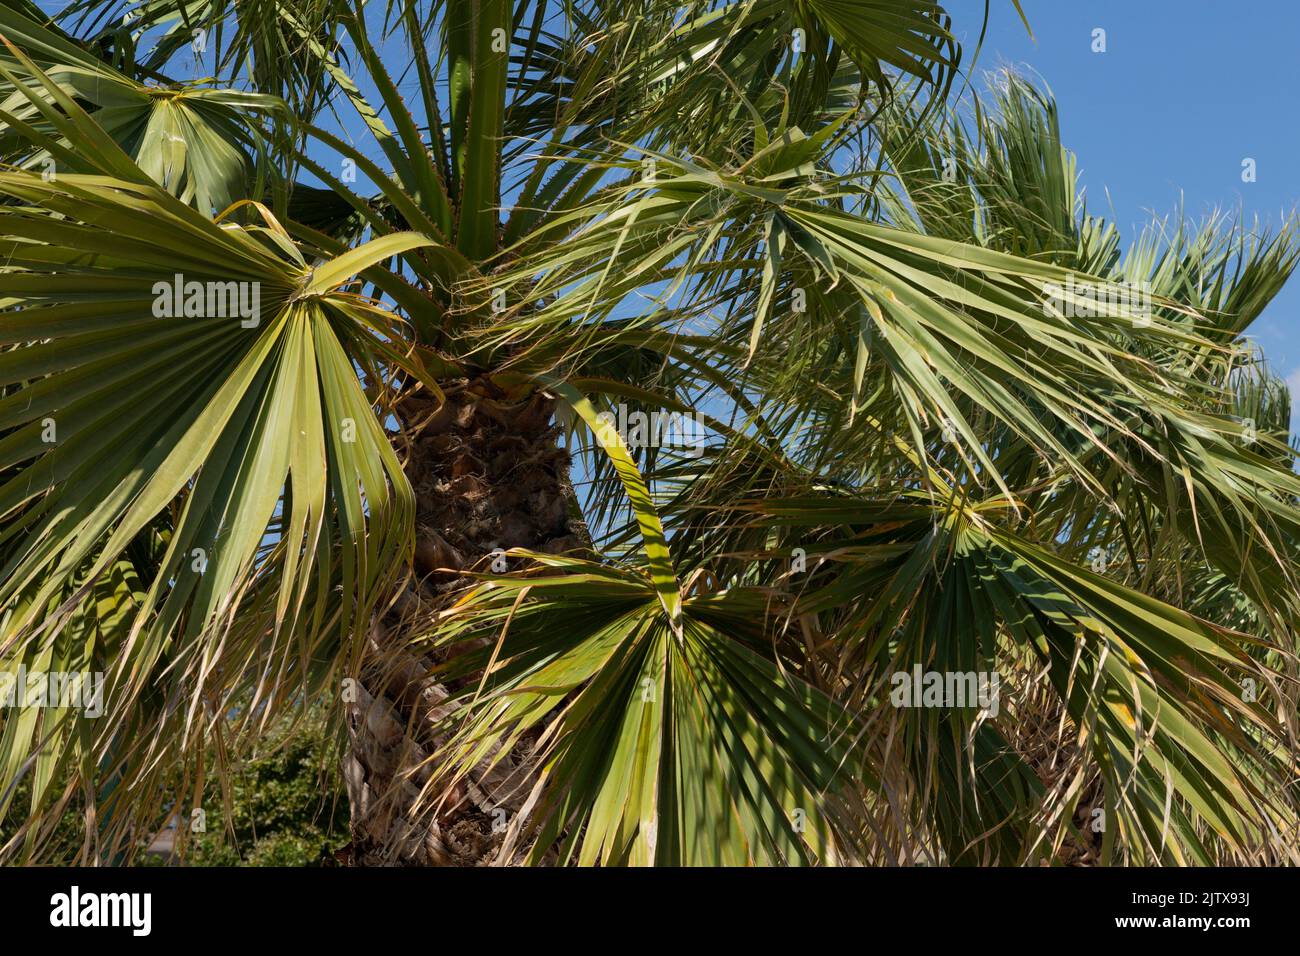 Palm tree leaves against bright blue sky. Stock Photo